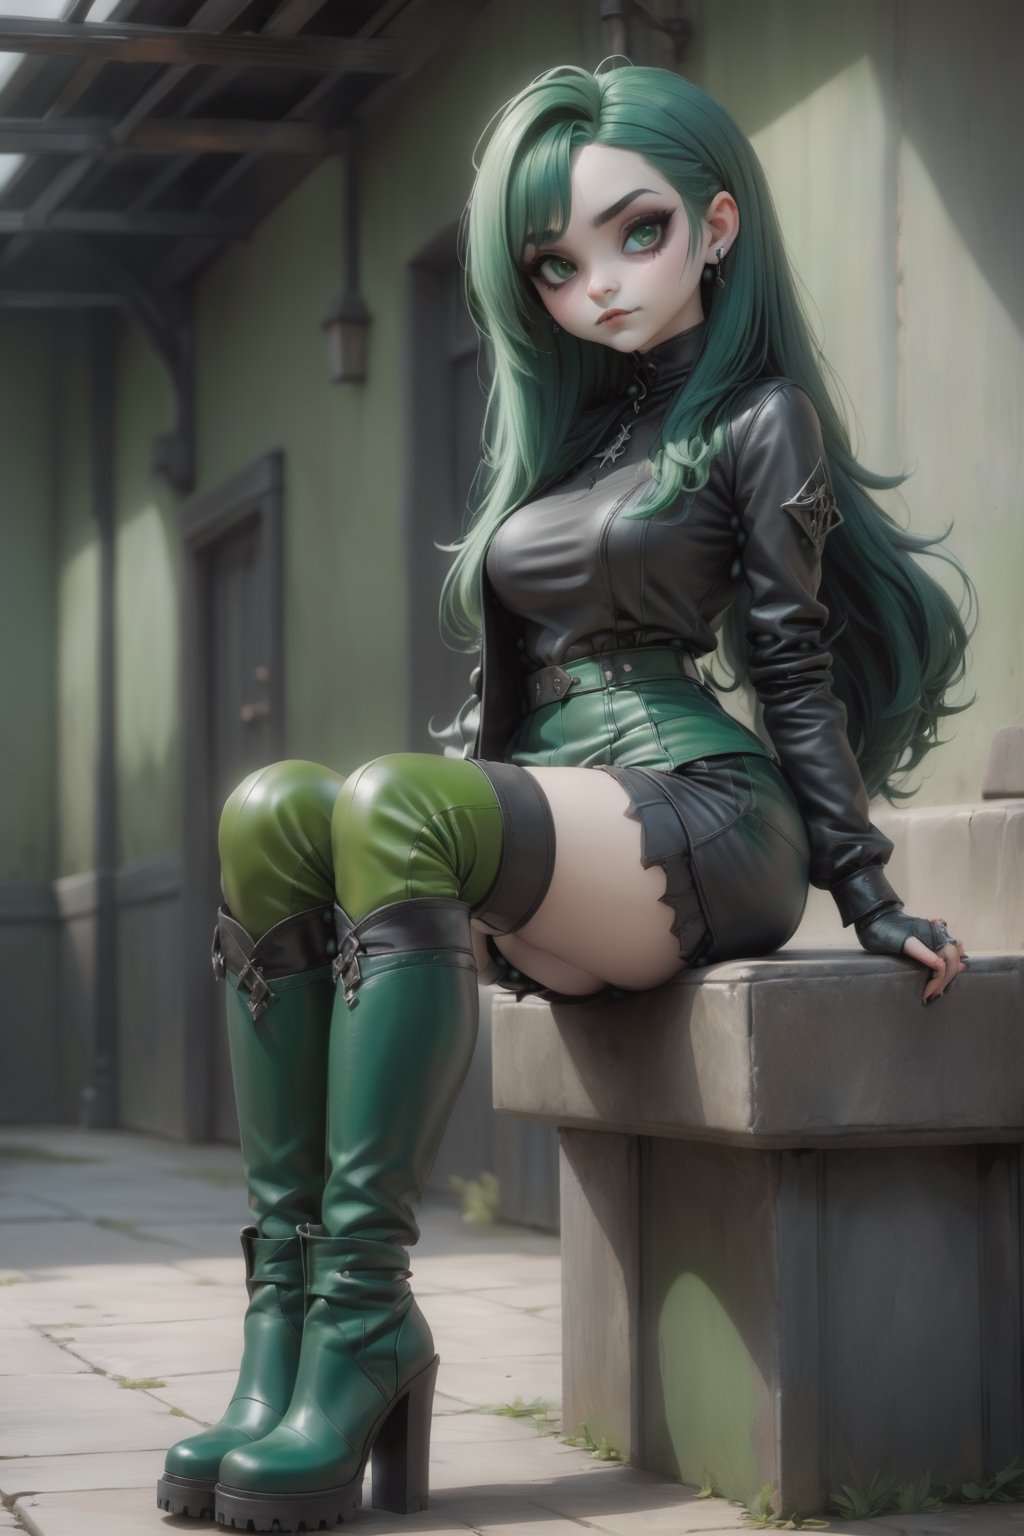 full body pose of a cute goth girl wearing green leather. She is sitting down and crossing her legs. She is wearing knee-high leather boots.